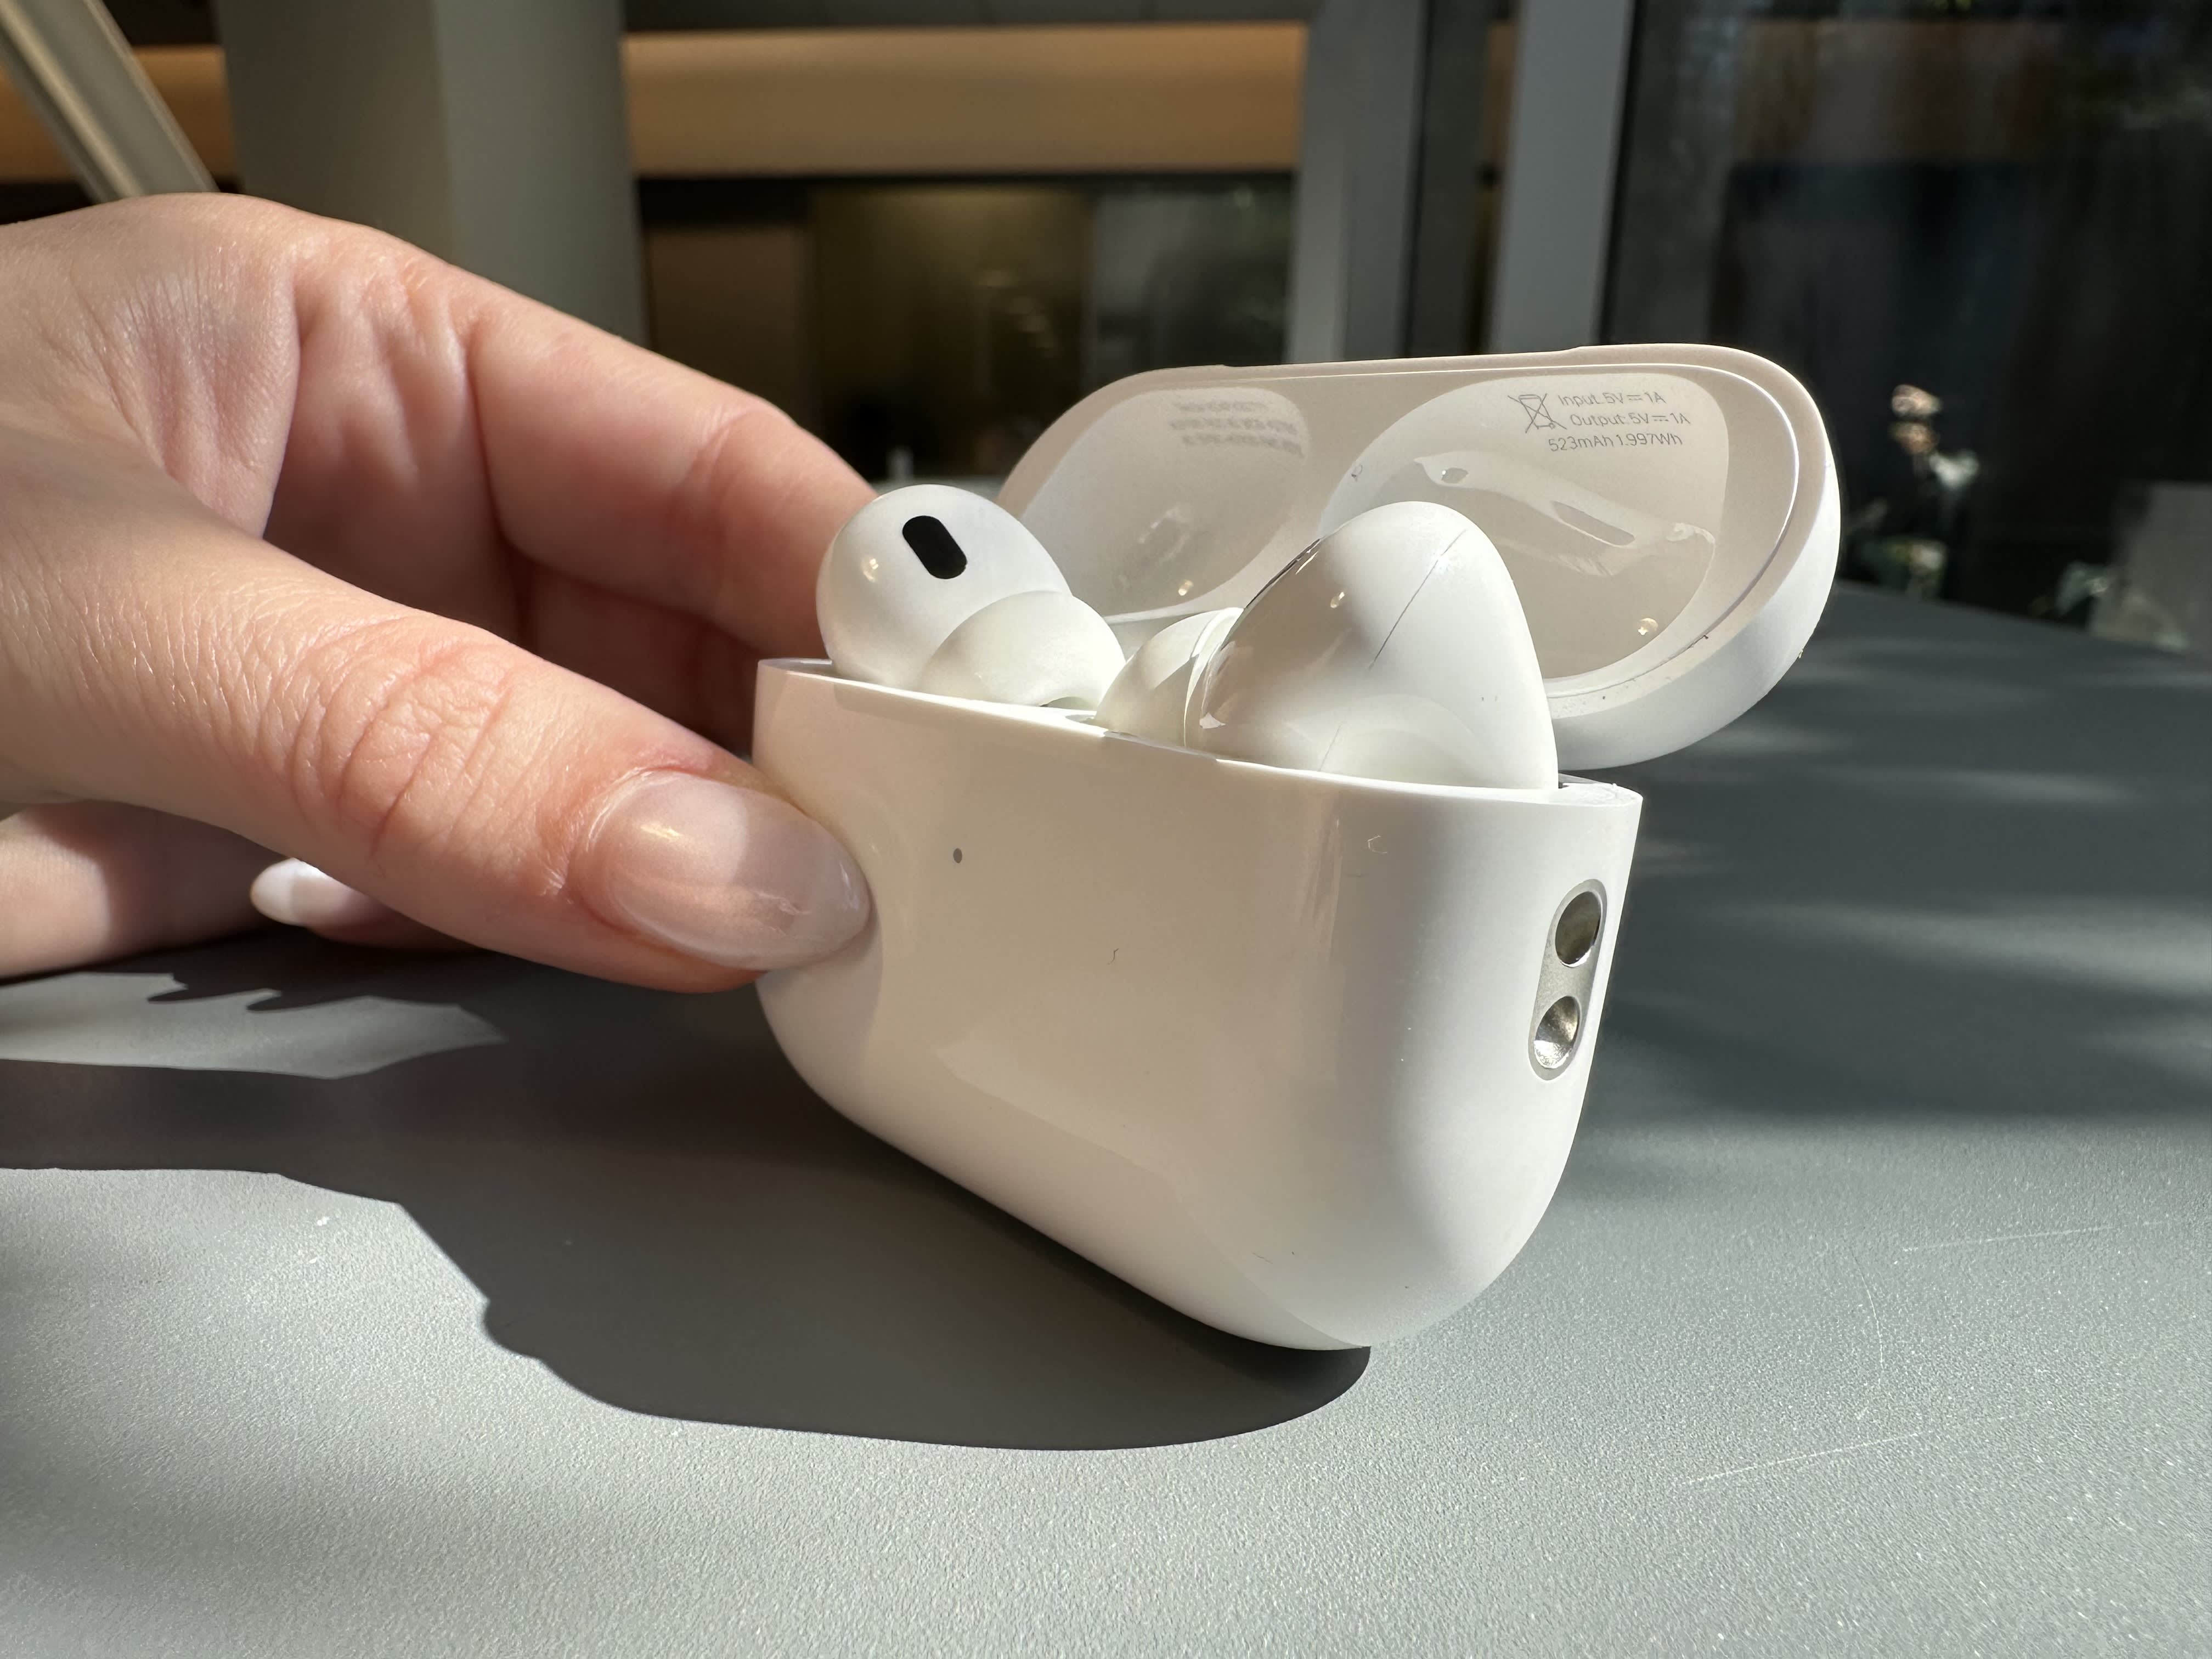 New AirPods Pro A must even you have the older Pros